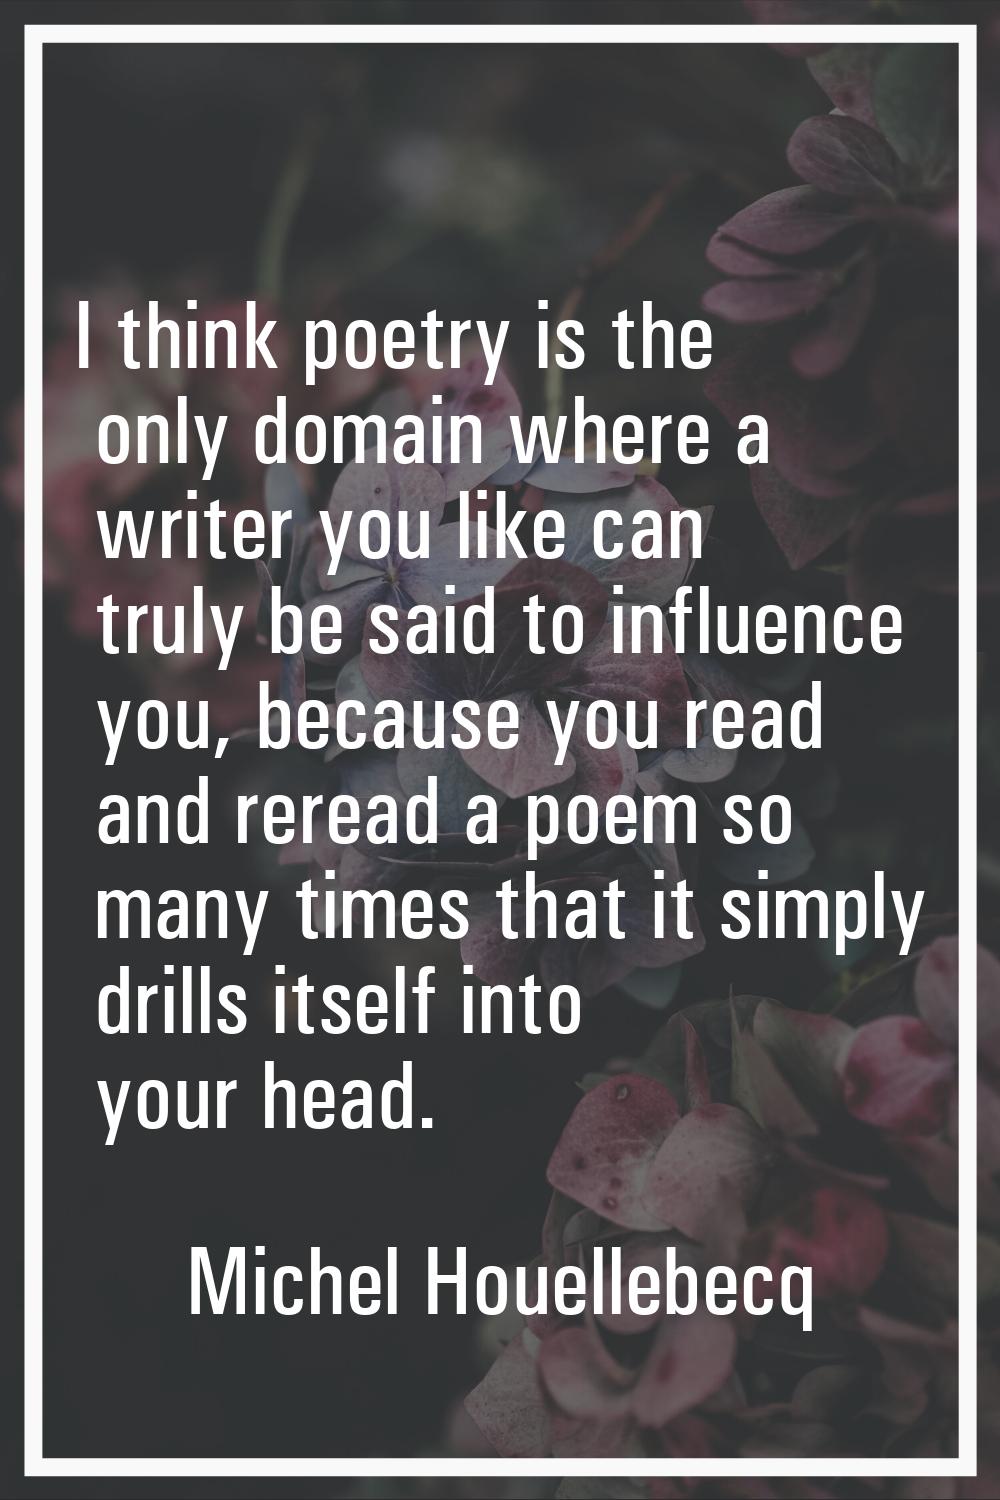 I think poetry is the only domain where a writer you like can truly be said to influence you, becau